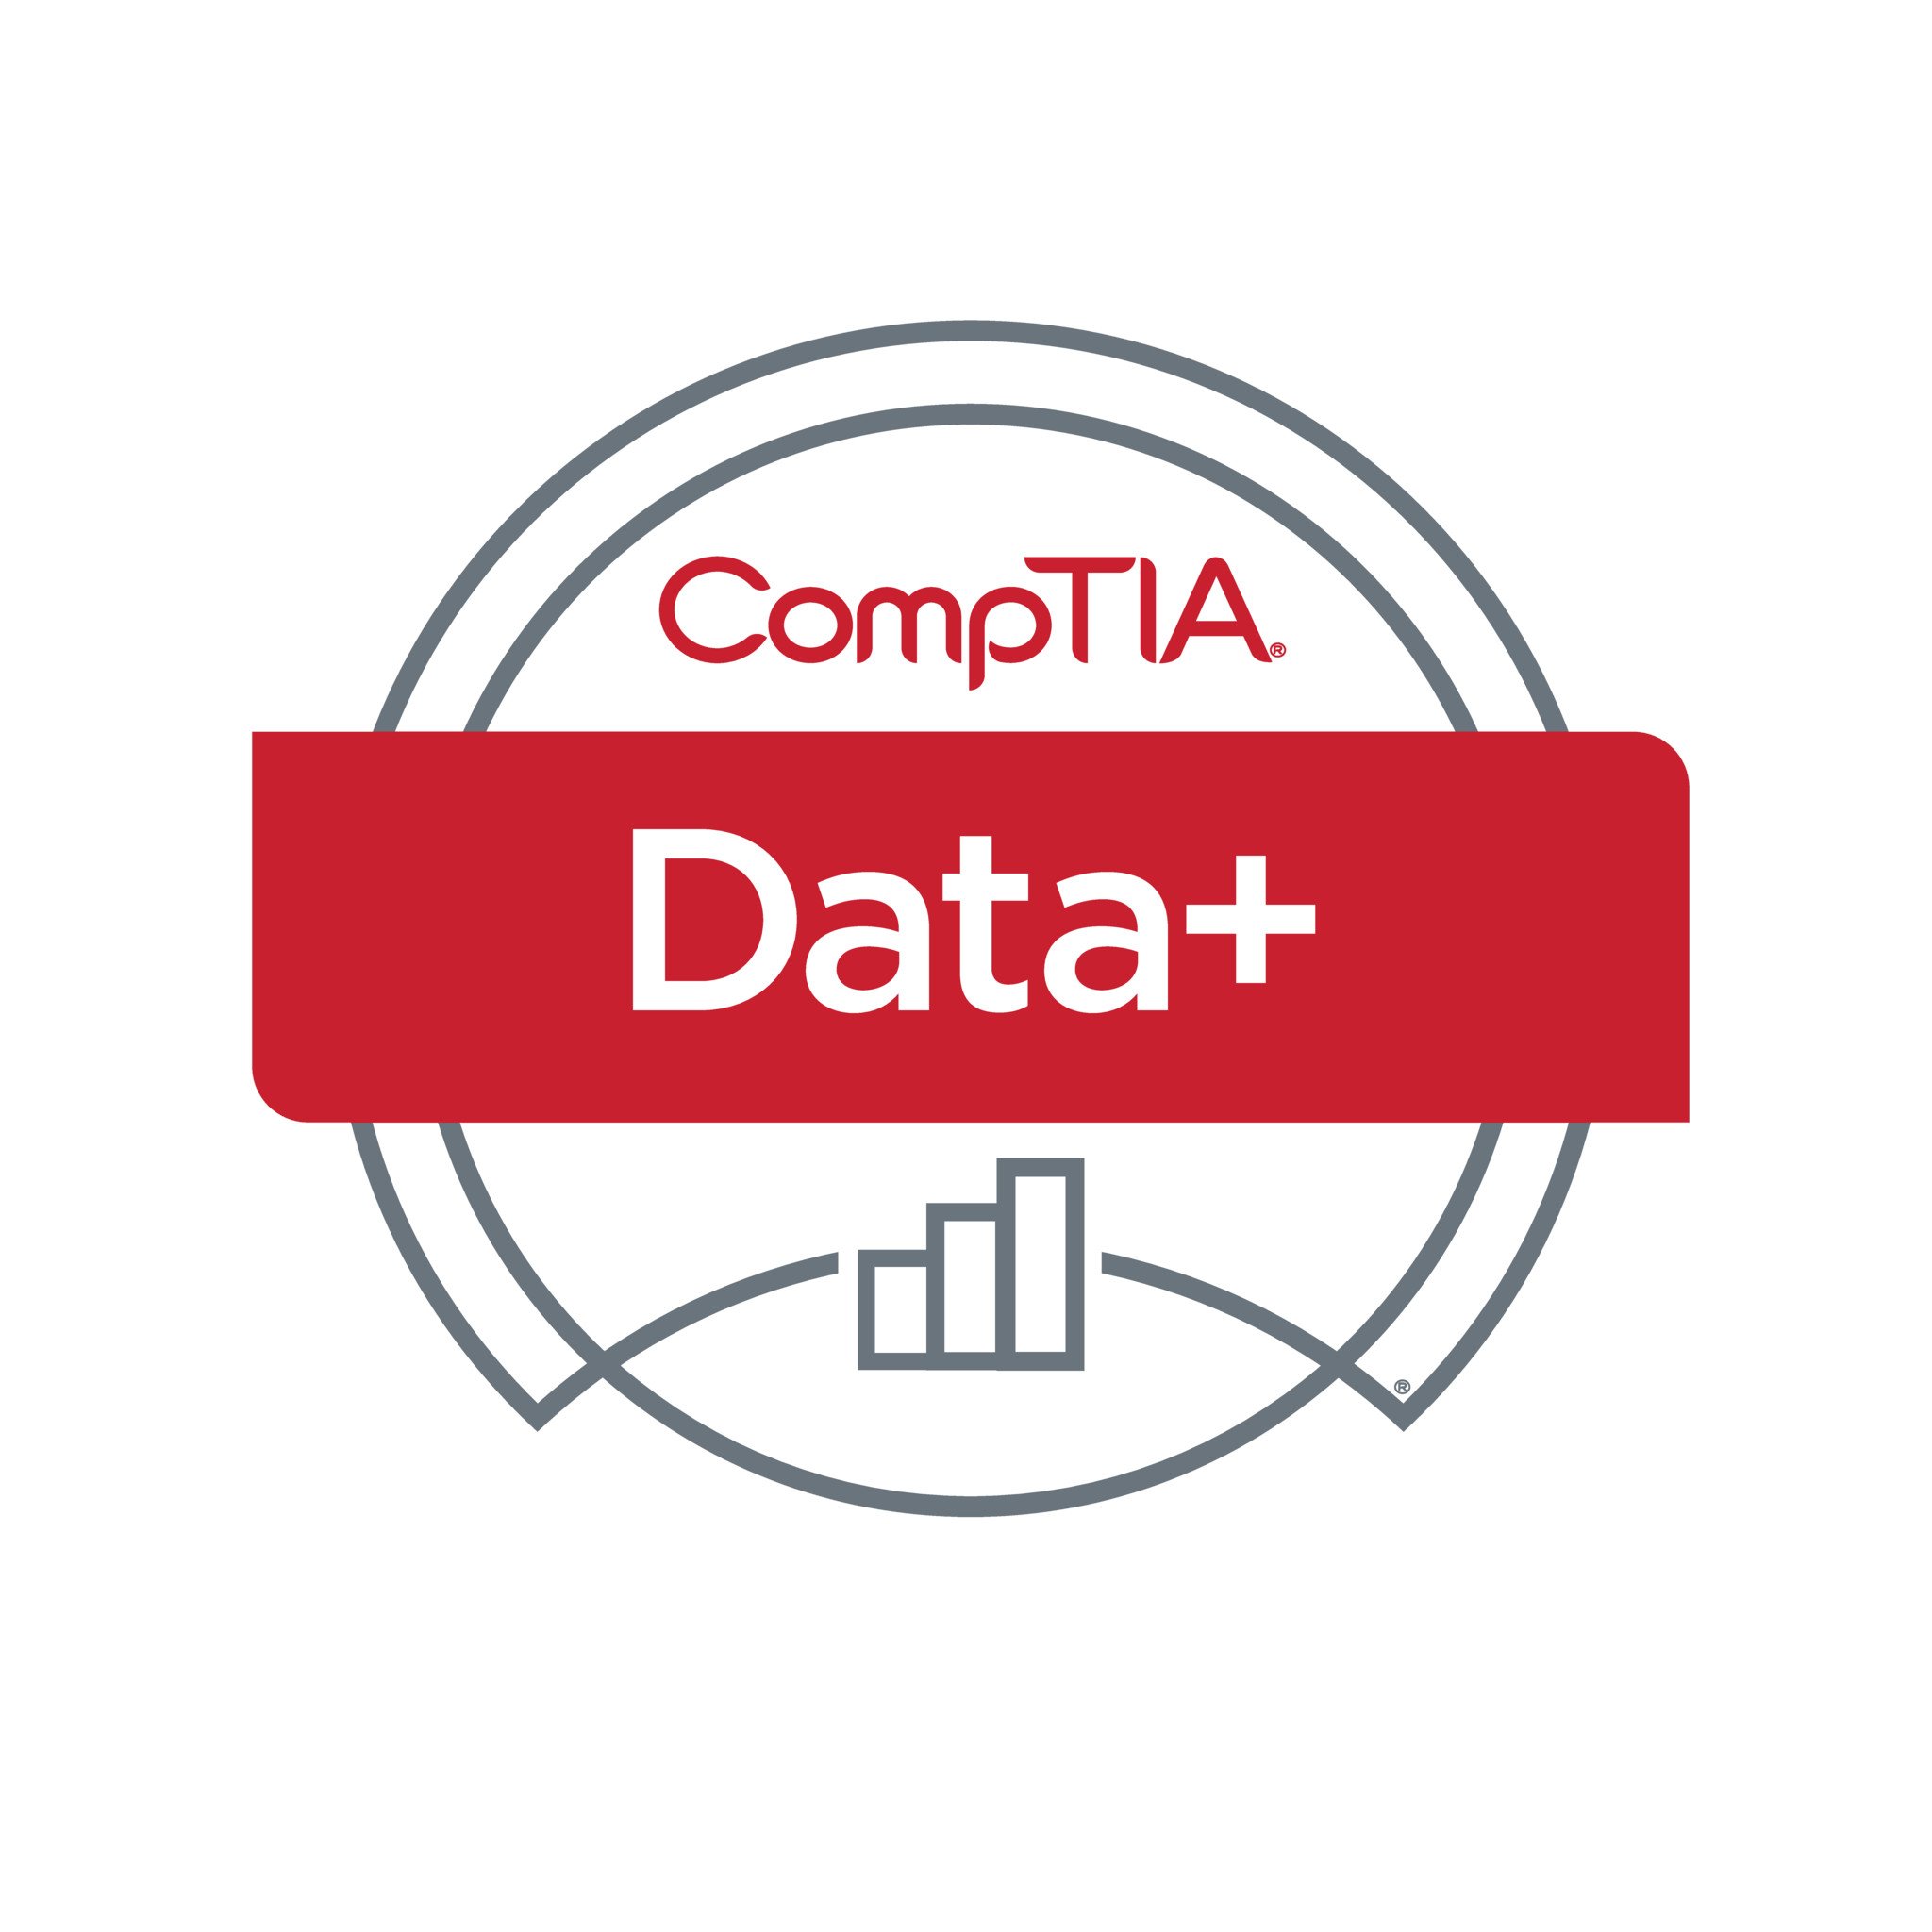 CompTIA Data+ training and certification course